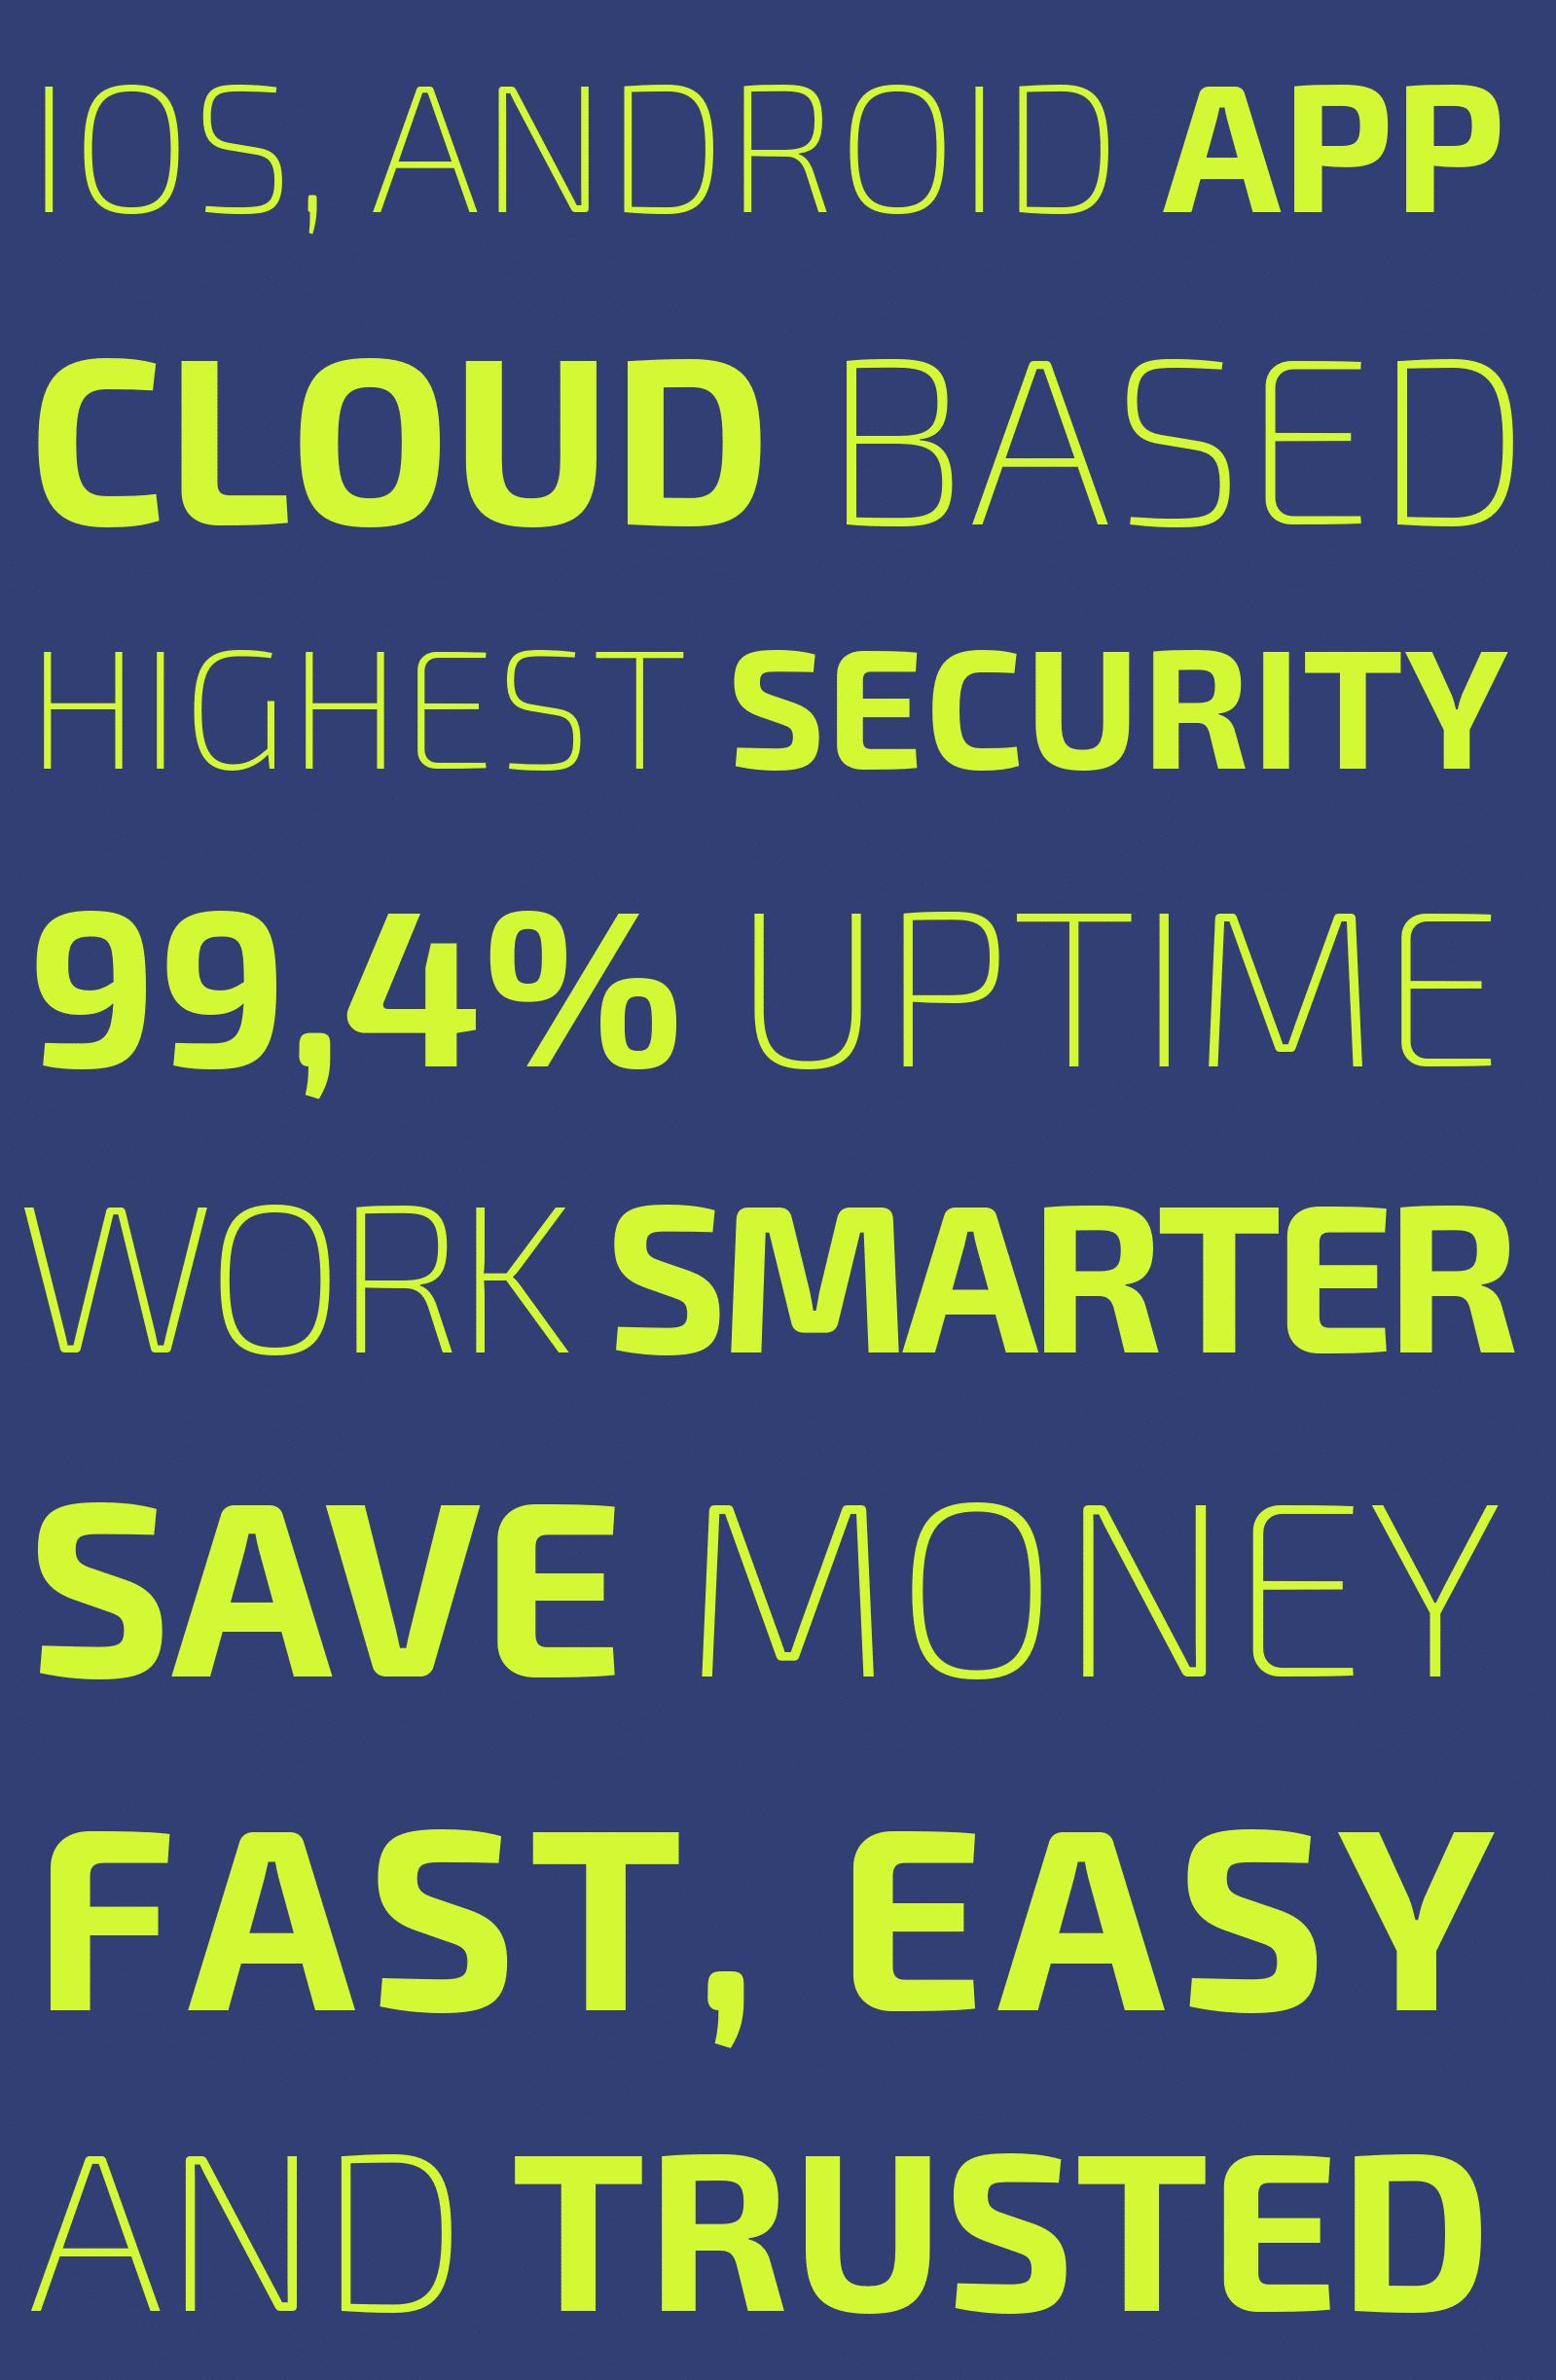 Image with text: 99.4% uptime, work smarter, save money, fast and easy and trusted